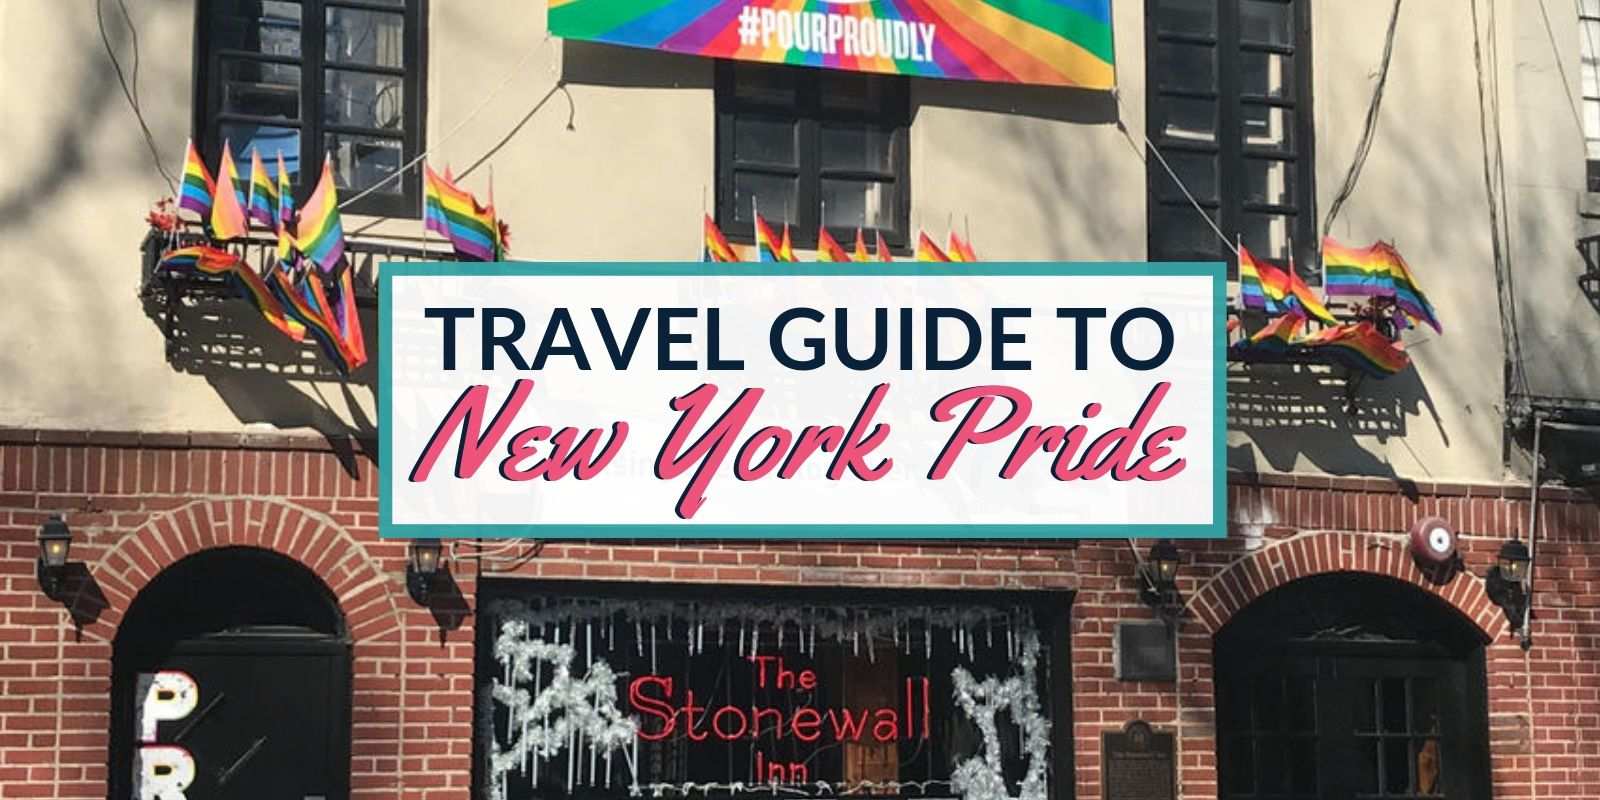 Our complete guide to celebrating gay pride in New York City, complete with the best gay places to stay and things to do